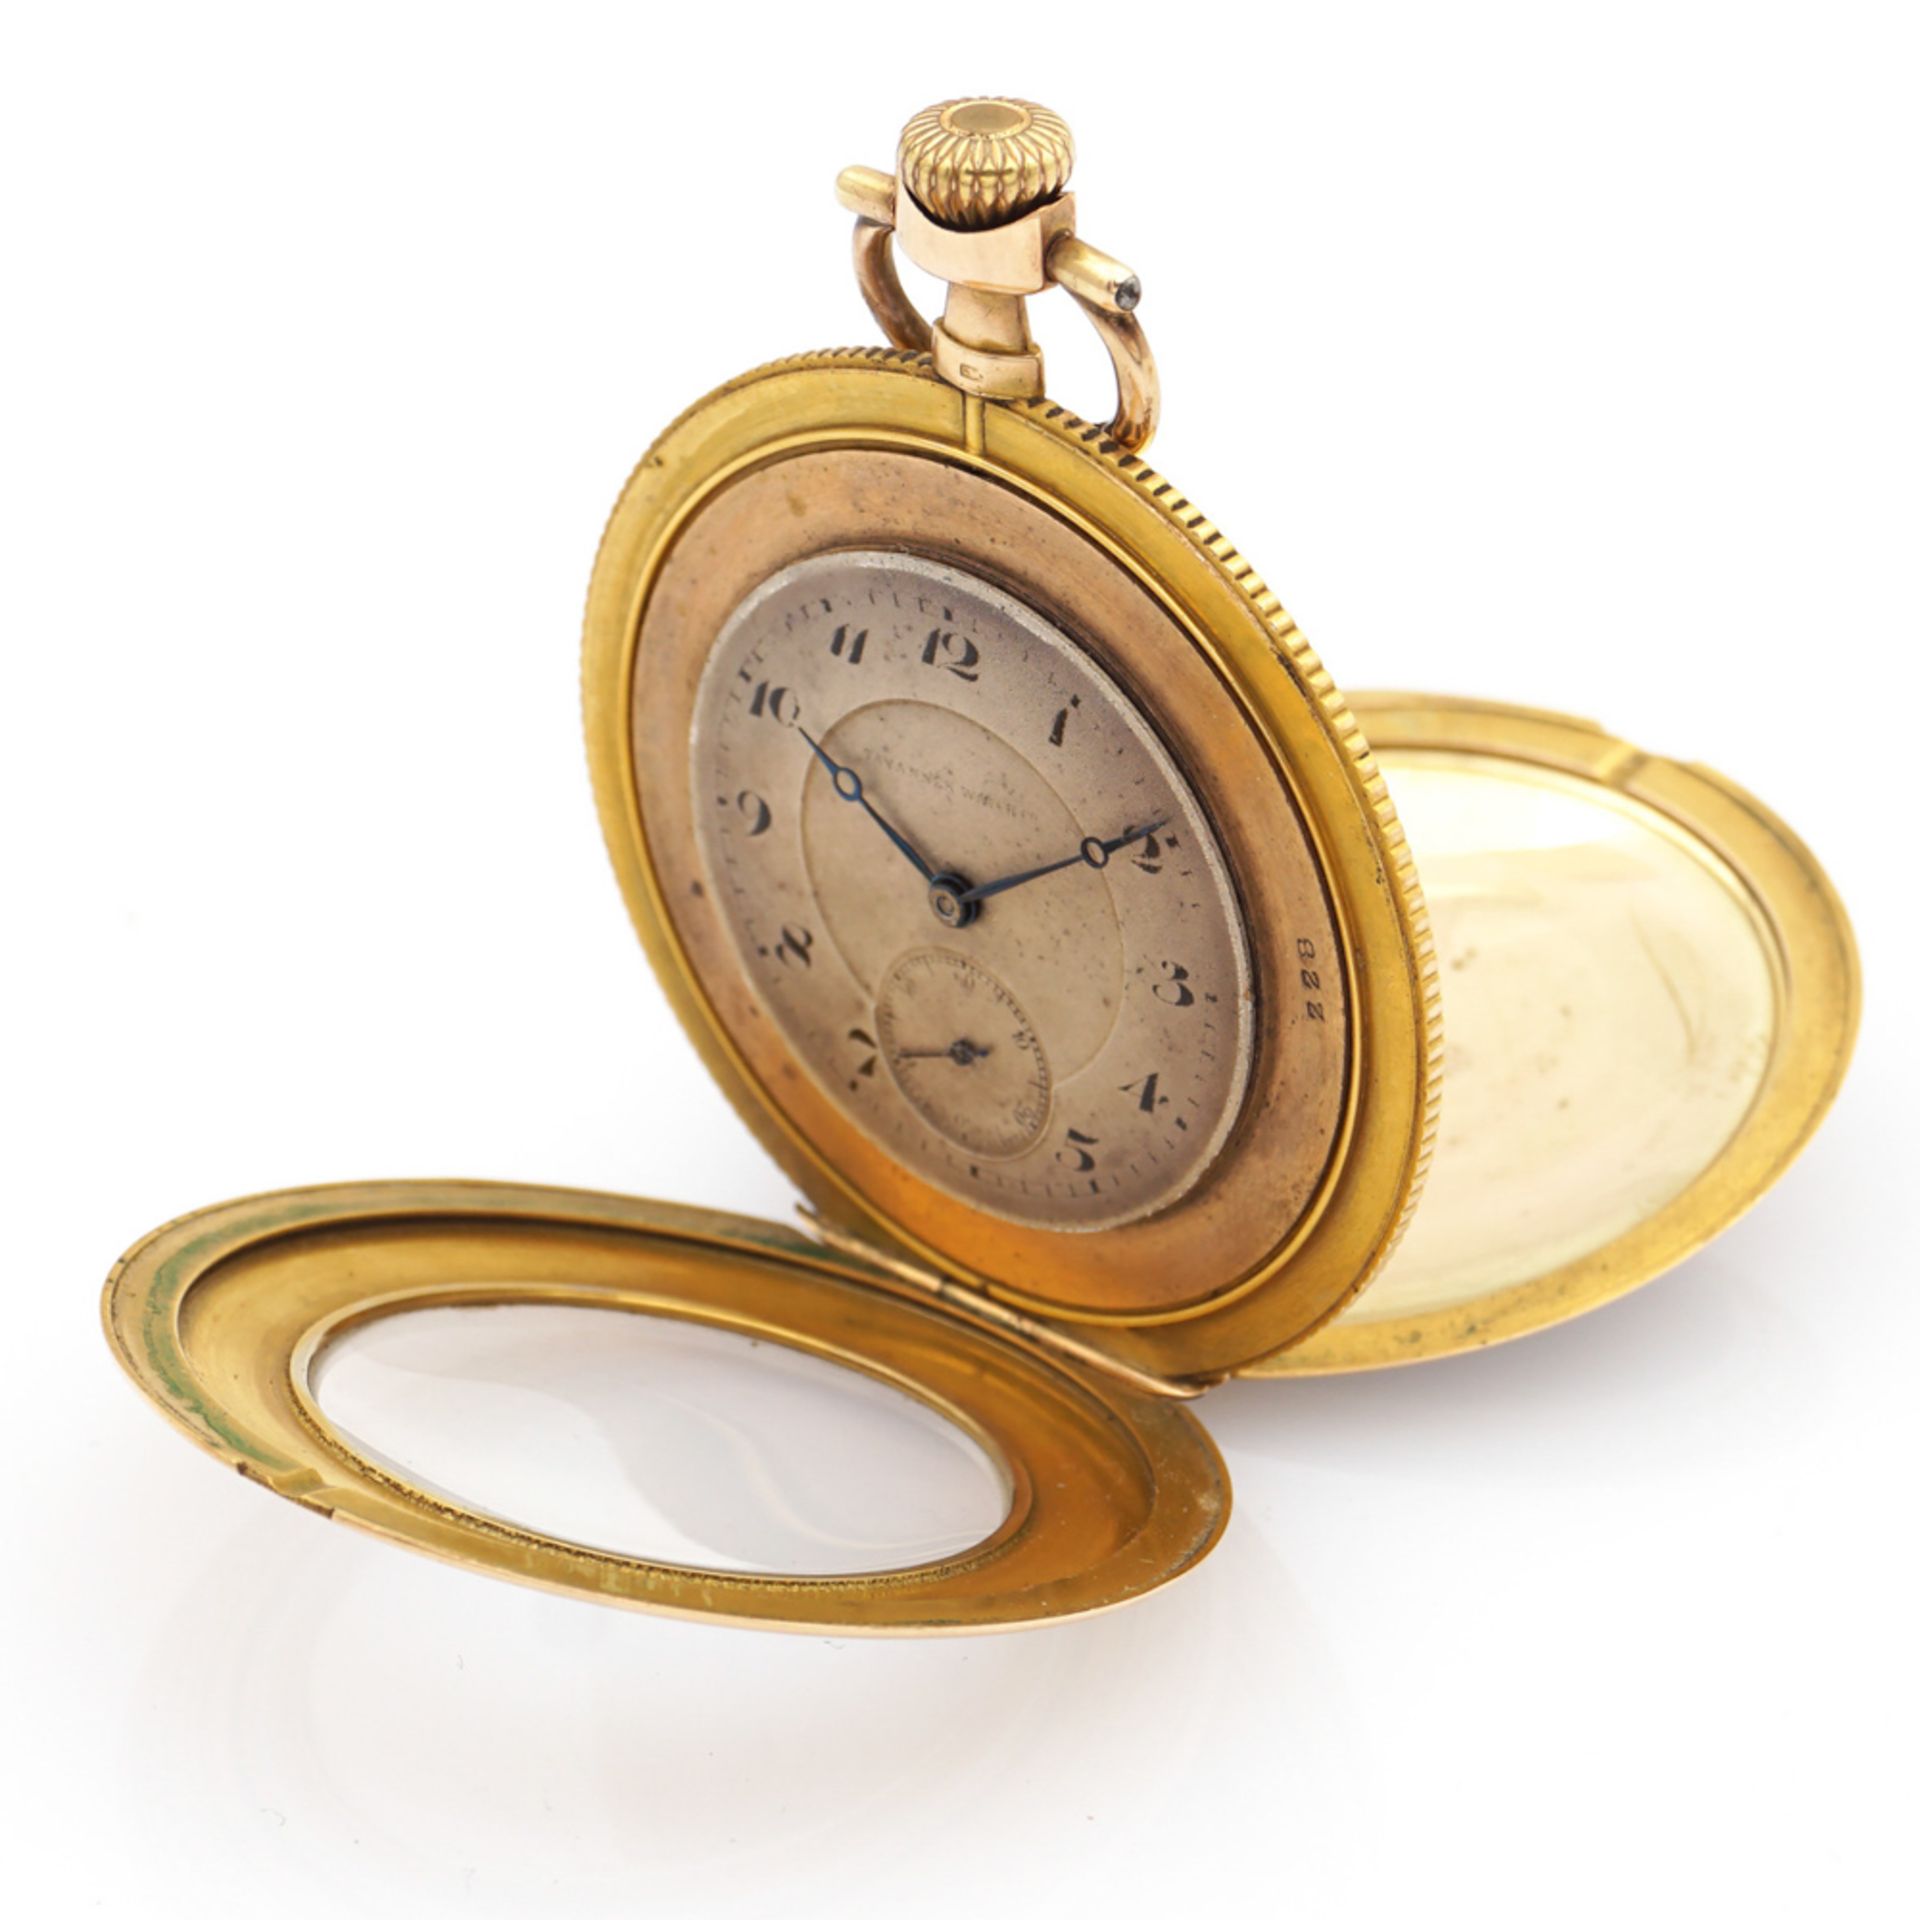 Tavannes Watch, pocket watch early 20th century weight 55,5 gr. - Image 3 of 4